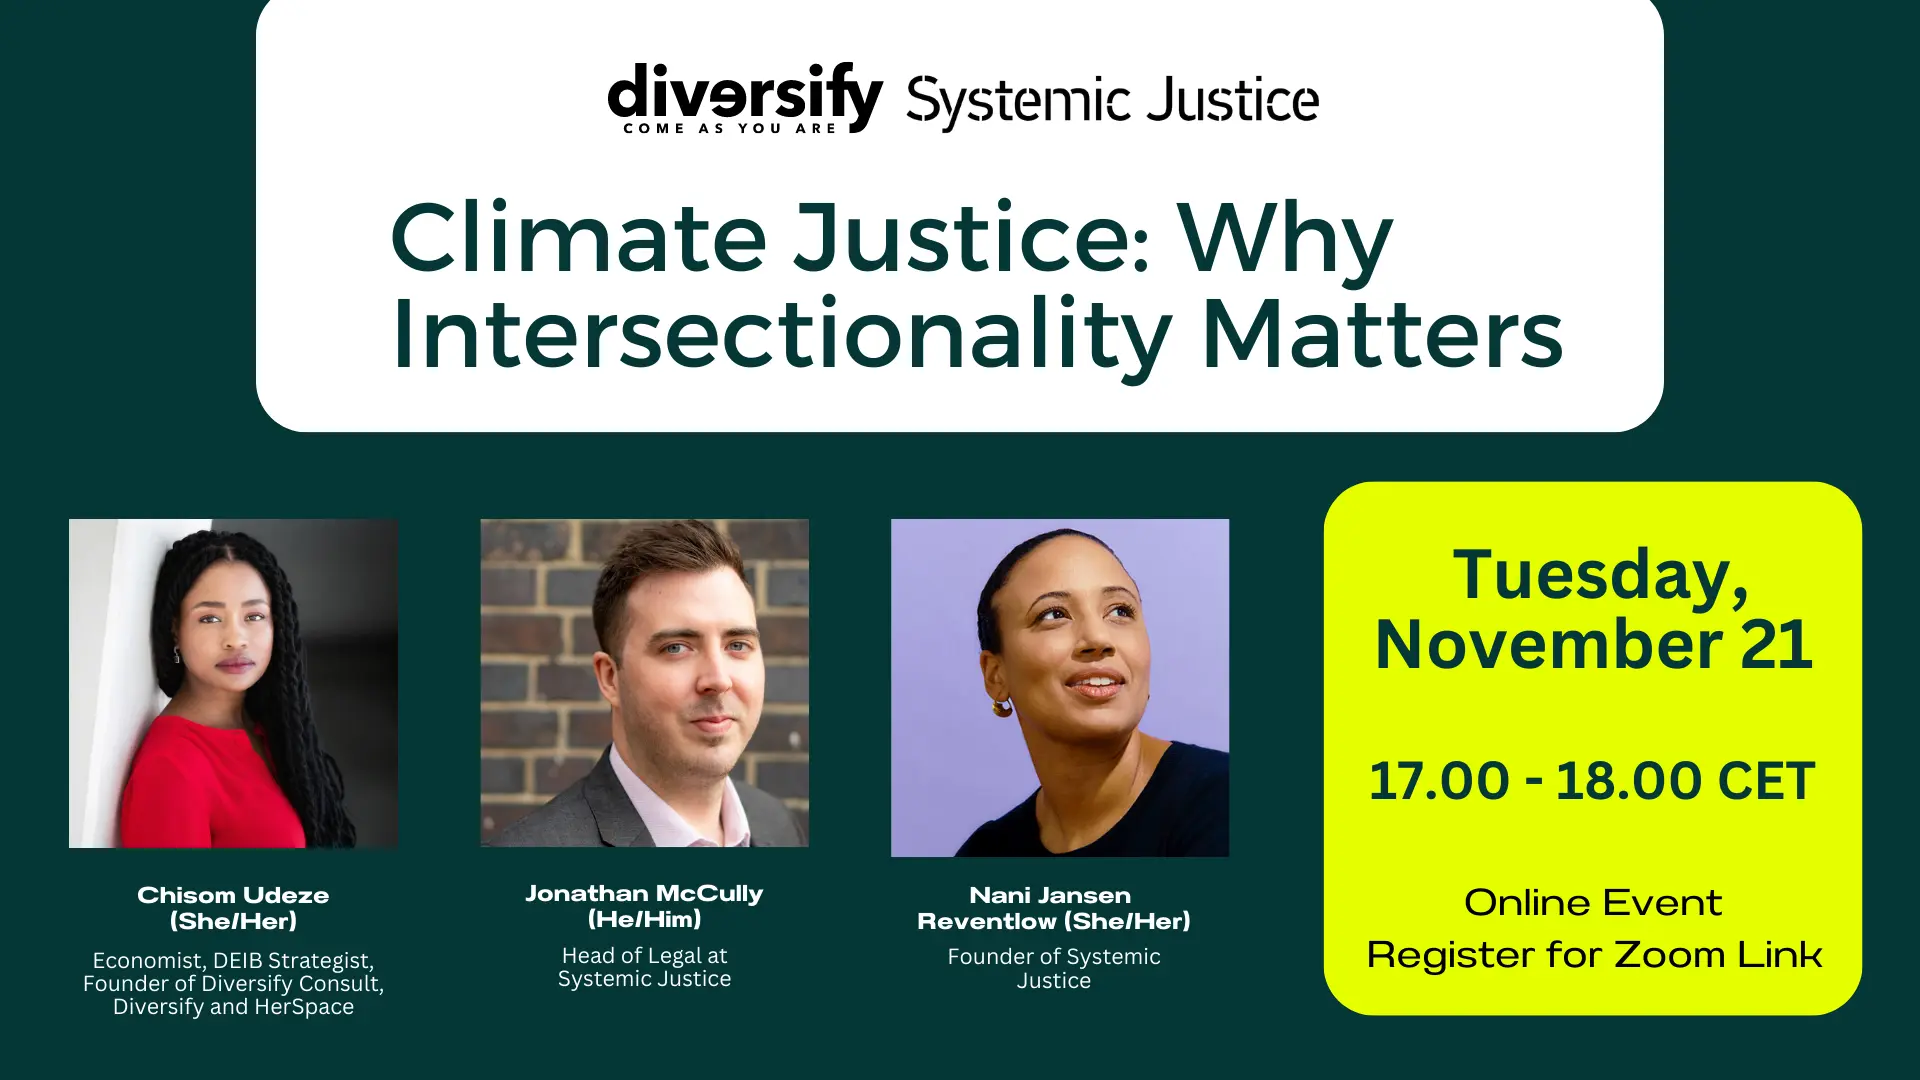 Climate justice: Why Intersectionality Matters